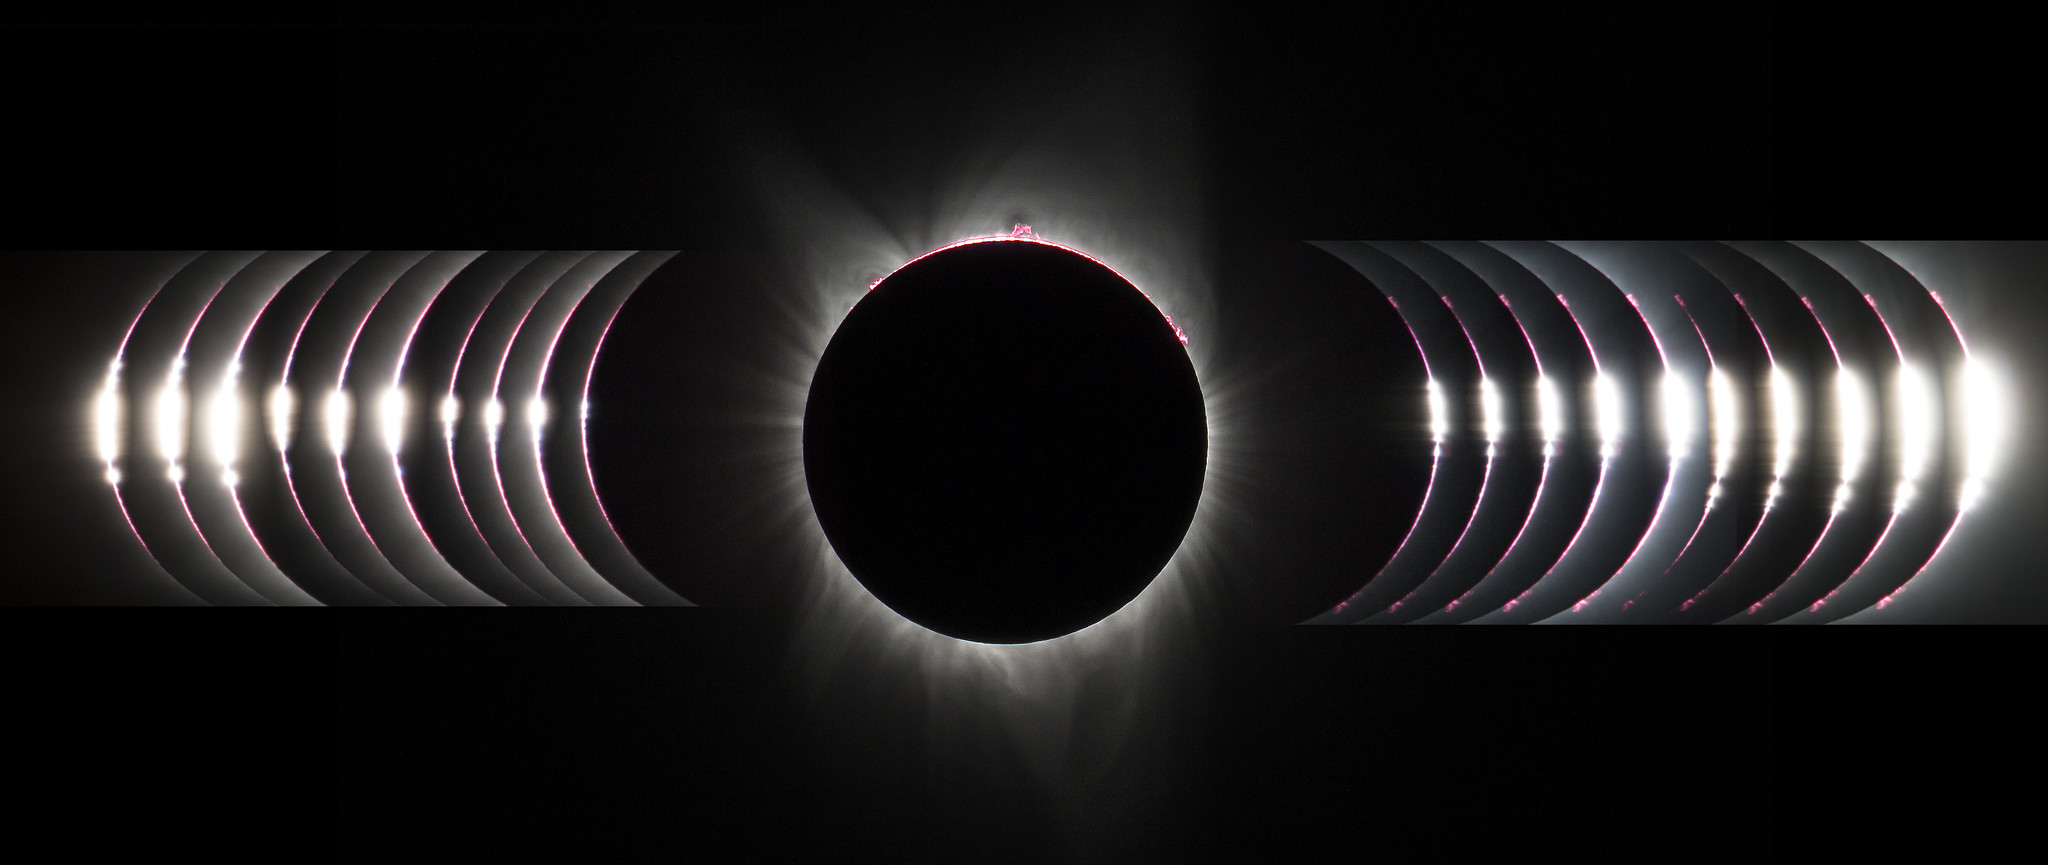 Phases of a total eclipse showing progression to and from totality, including mistakes in visibility.